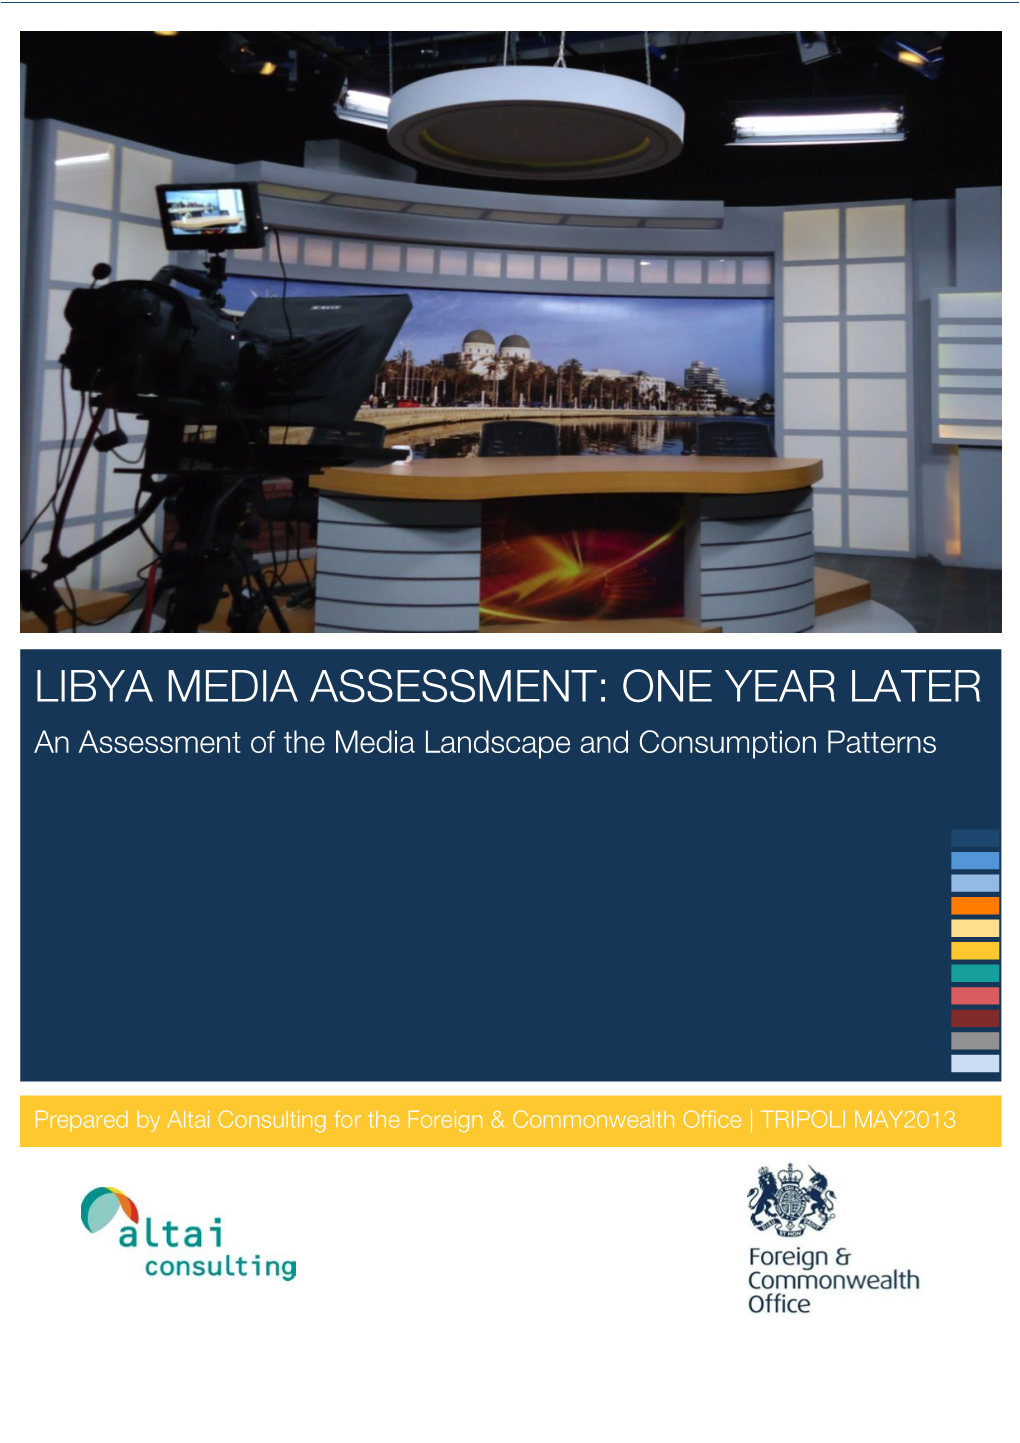 LIBYA MEDIA ASSESSMENT: ONE YEAR LATER an Assessment of the Media Landscape and Consumption Patterns